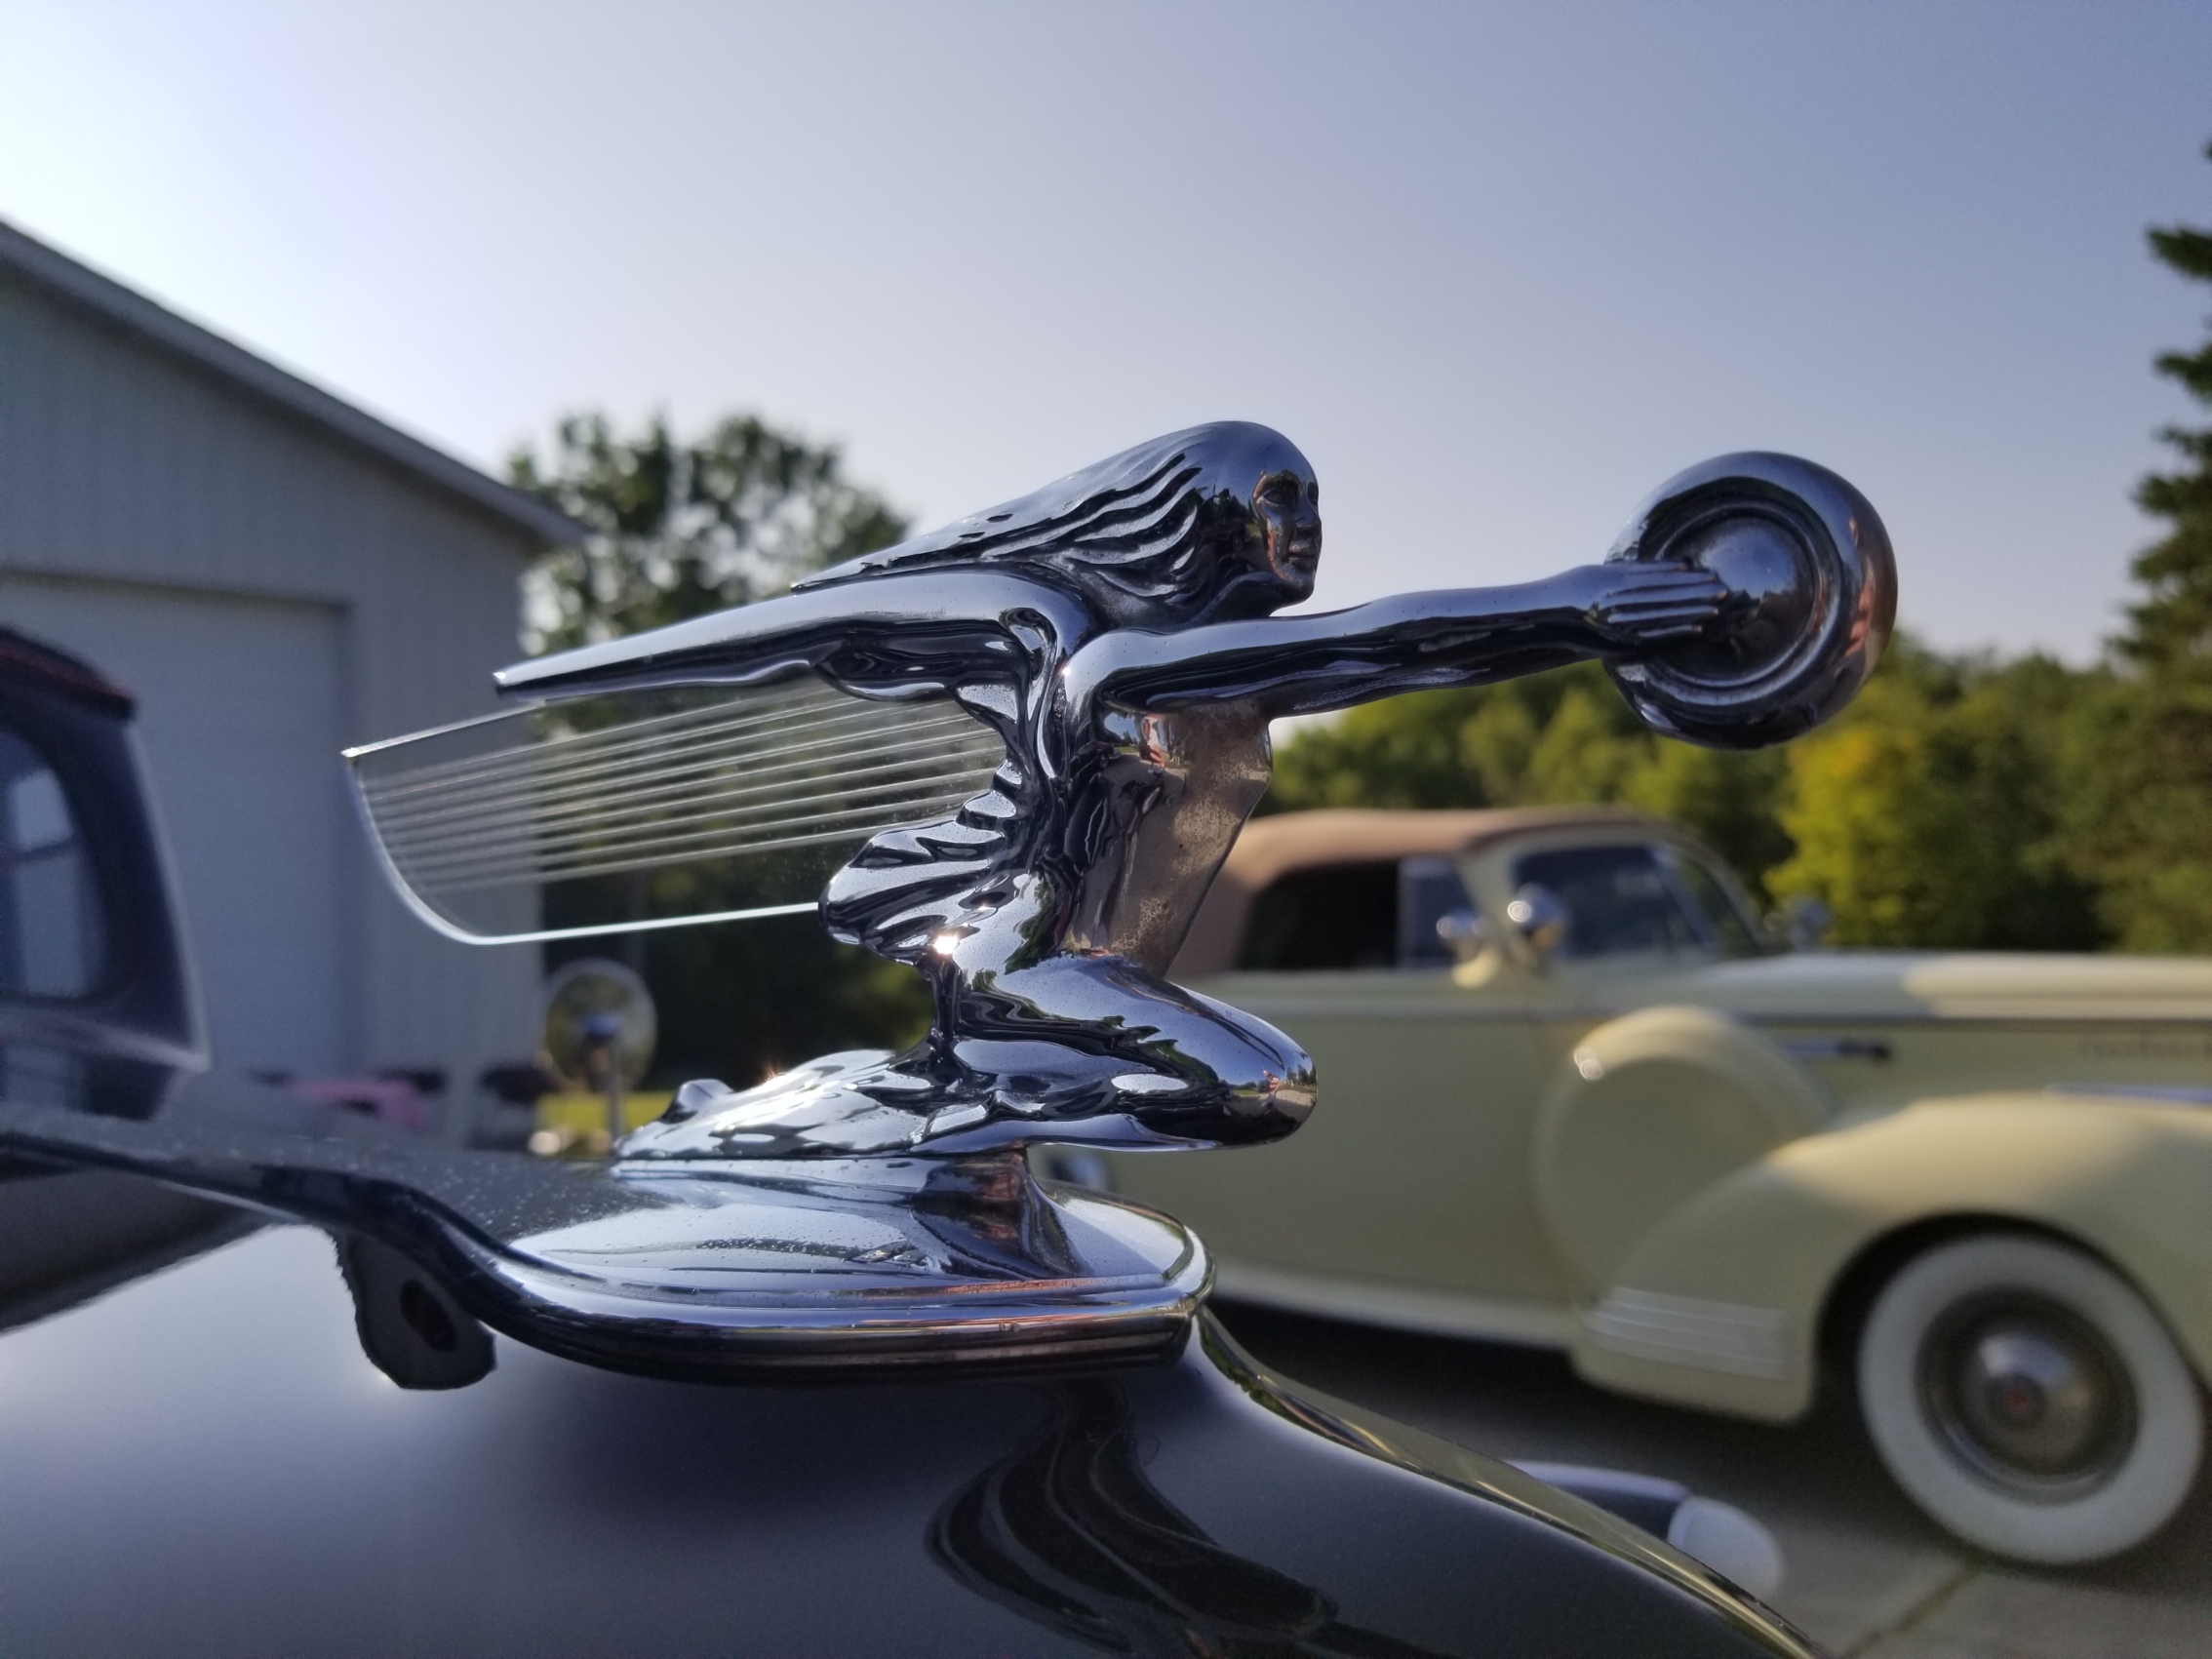 Hood Ornament of 1940 120 1801 Convertible Sedan in front of 1941 Packard 120 Convertible Coupe in Yellow